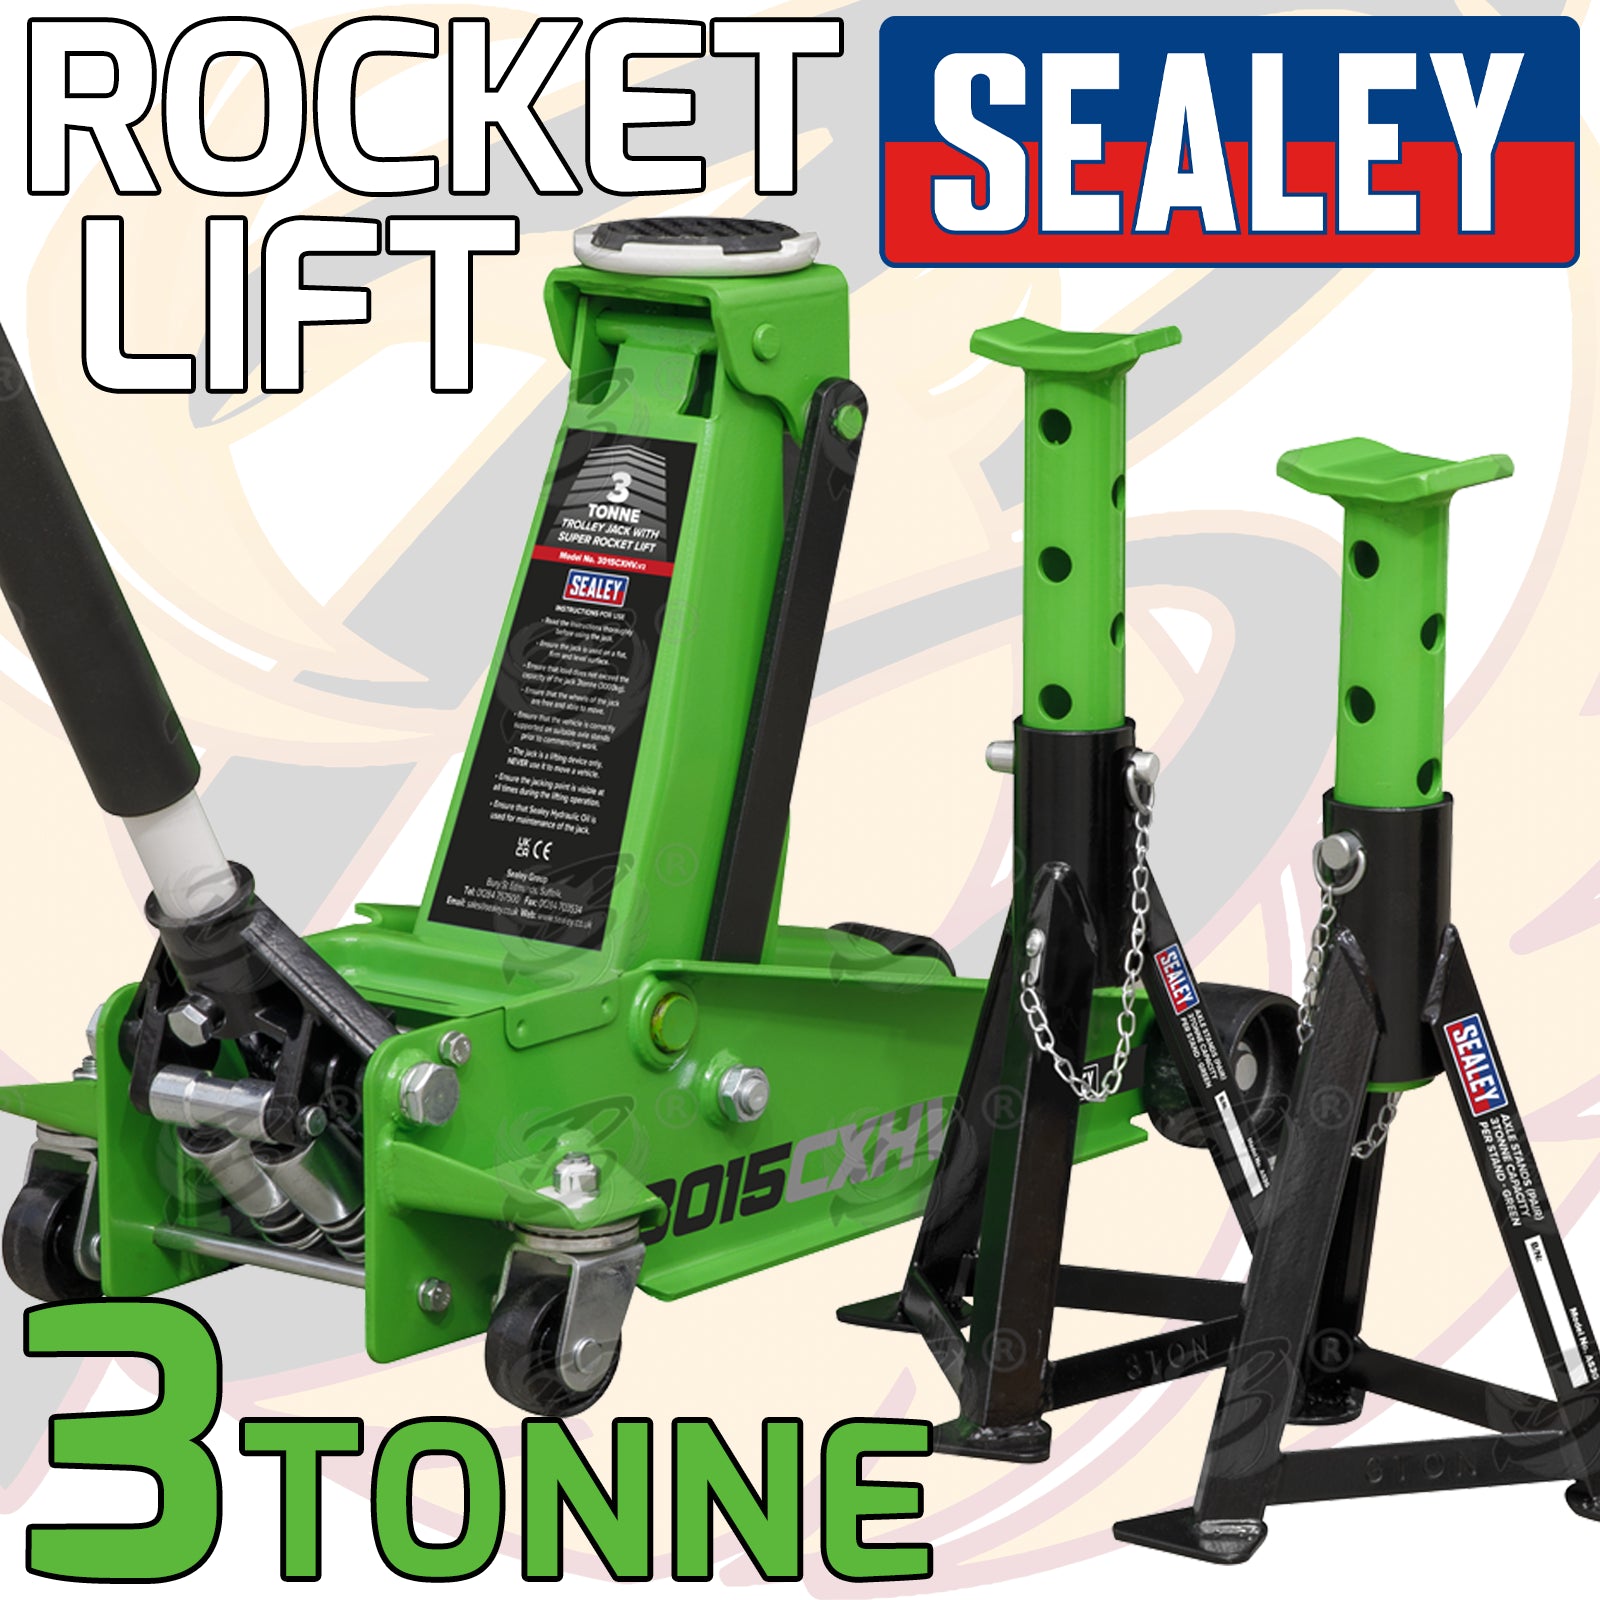 SEALEY 3 TONNE QUICK LIFT TROLLEY JACK & AXLE STANDS